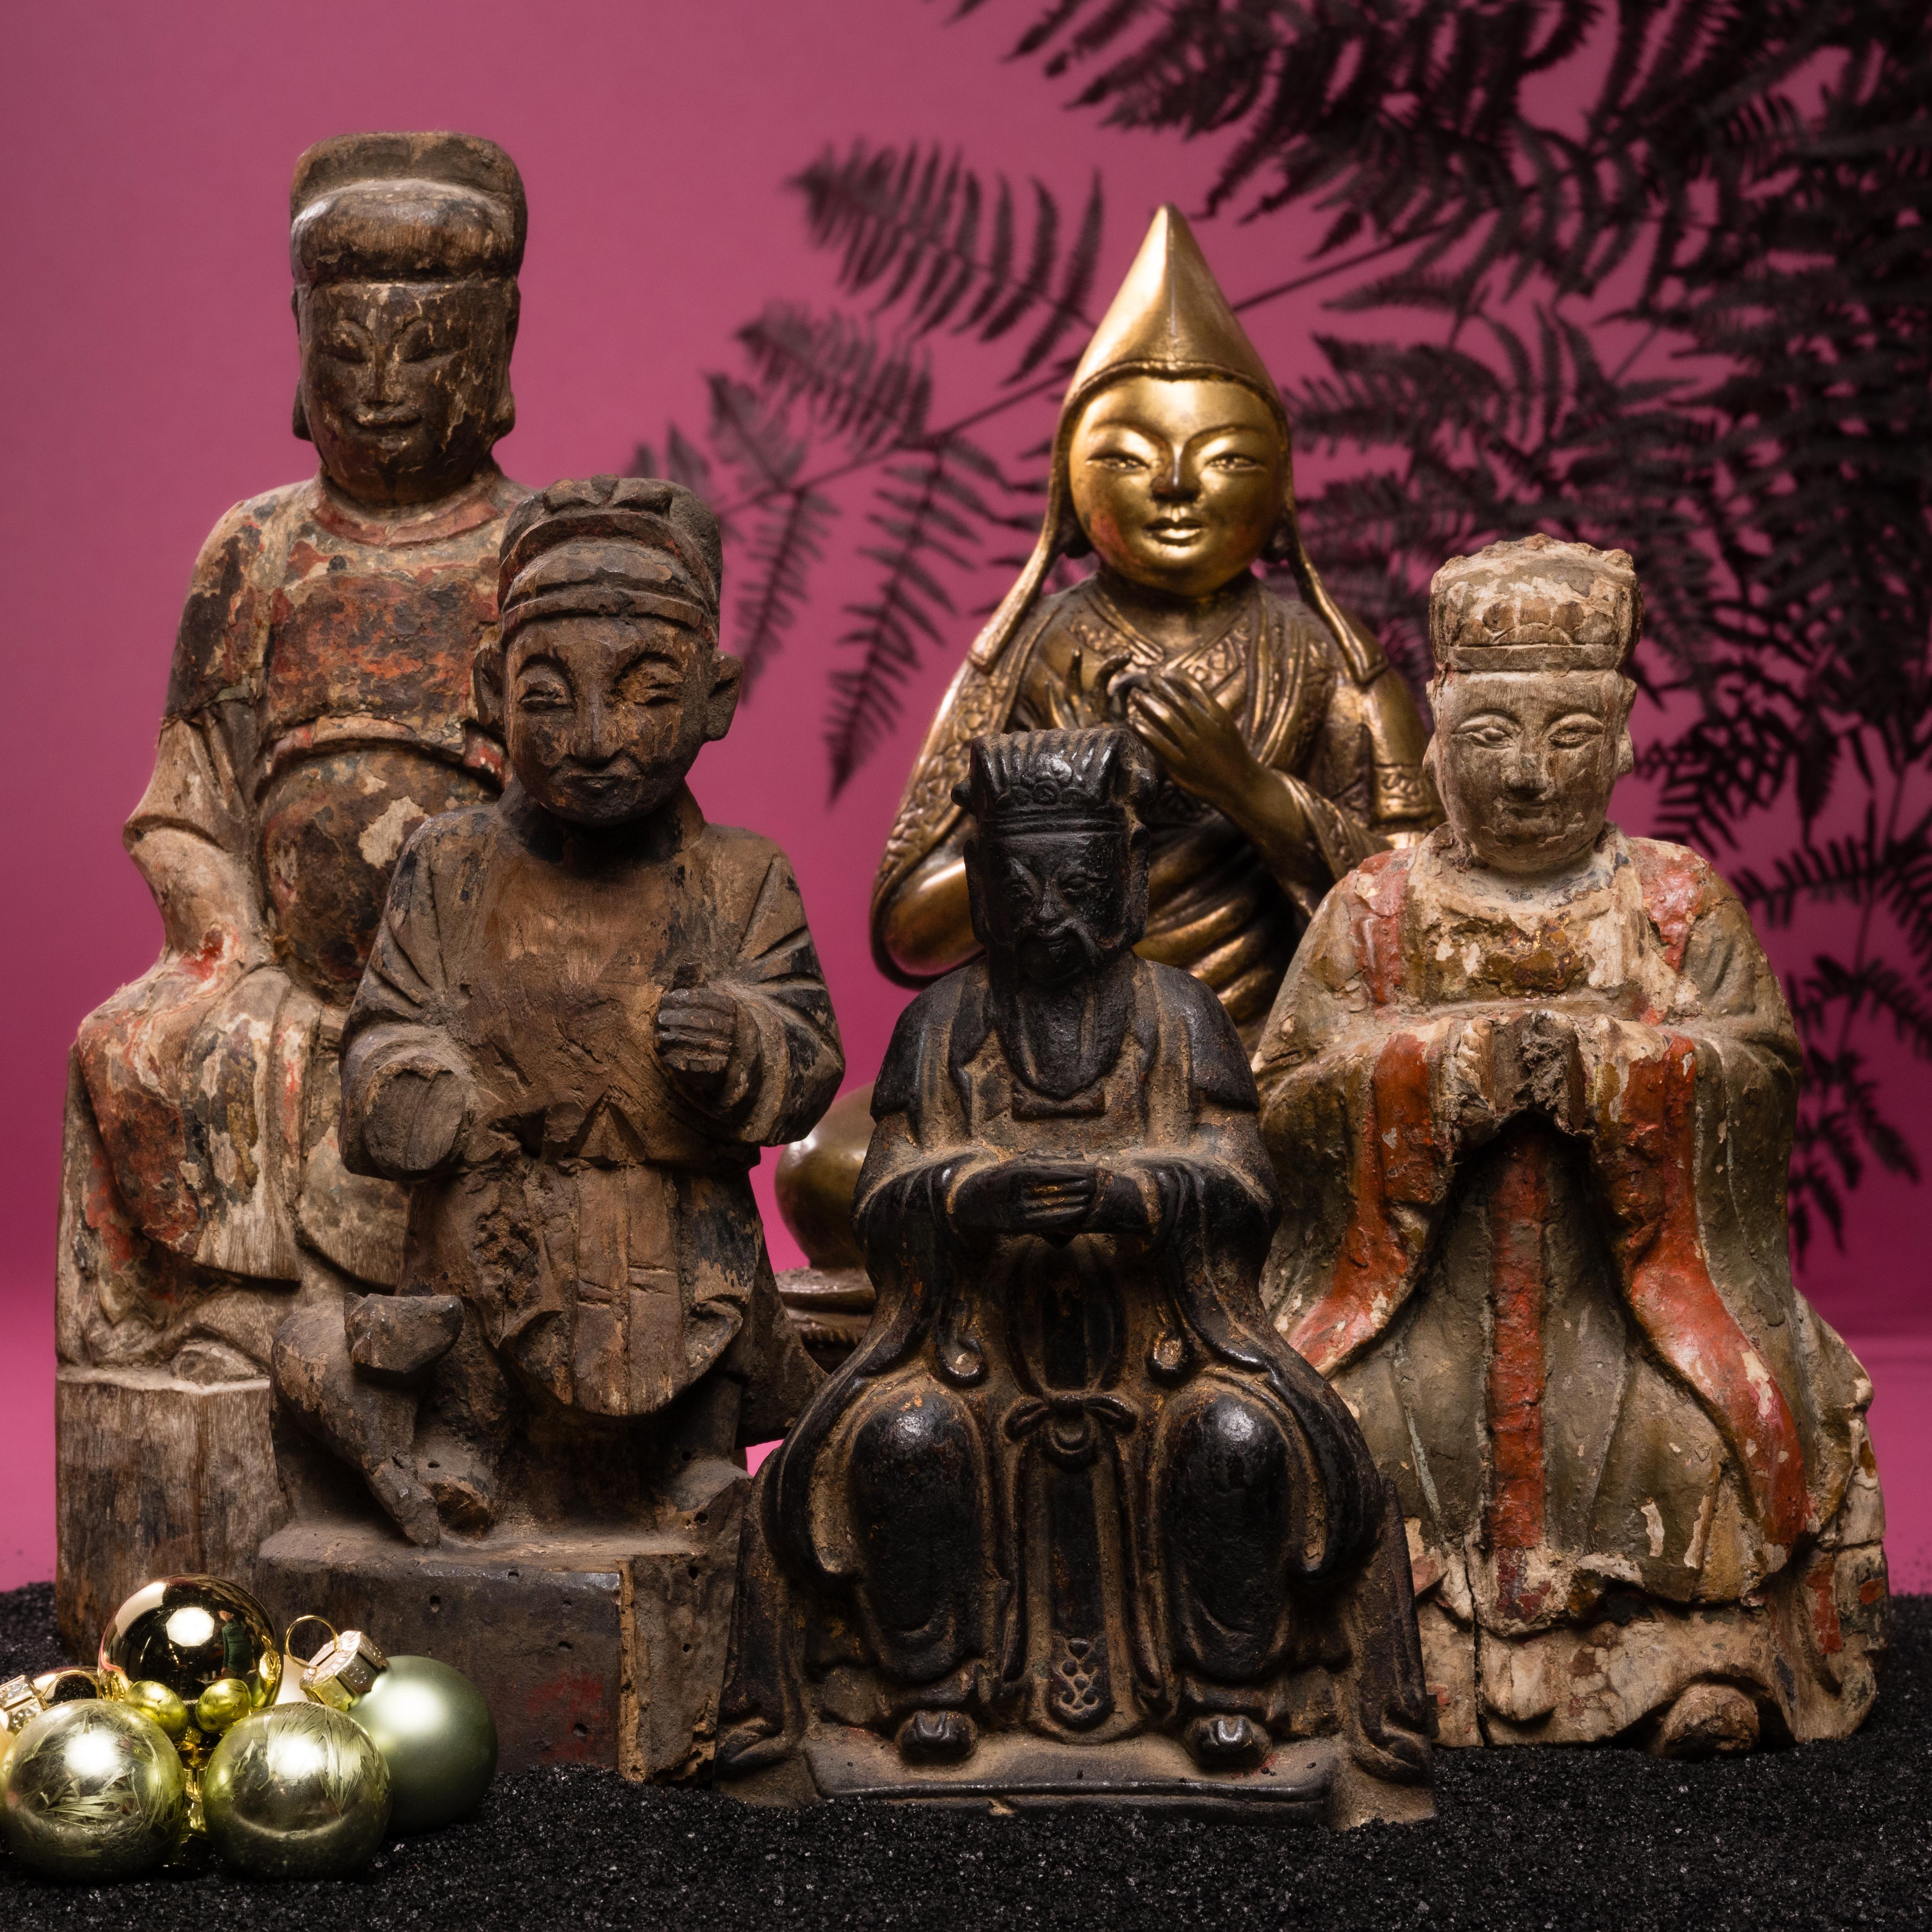 An integral part of traditional Chinese home life, ancestor worship before a domestic altar often featured painted ancestral portraits or tabletop ancestor figures. This early 19th-century ancestor figure was carefully hand-carved and painted to